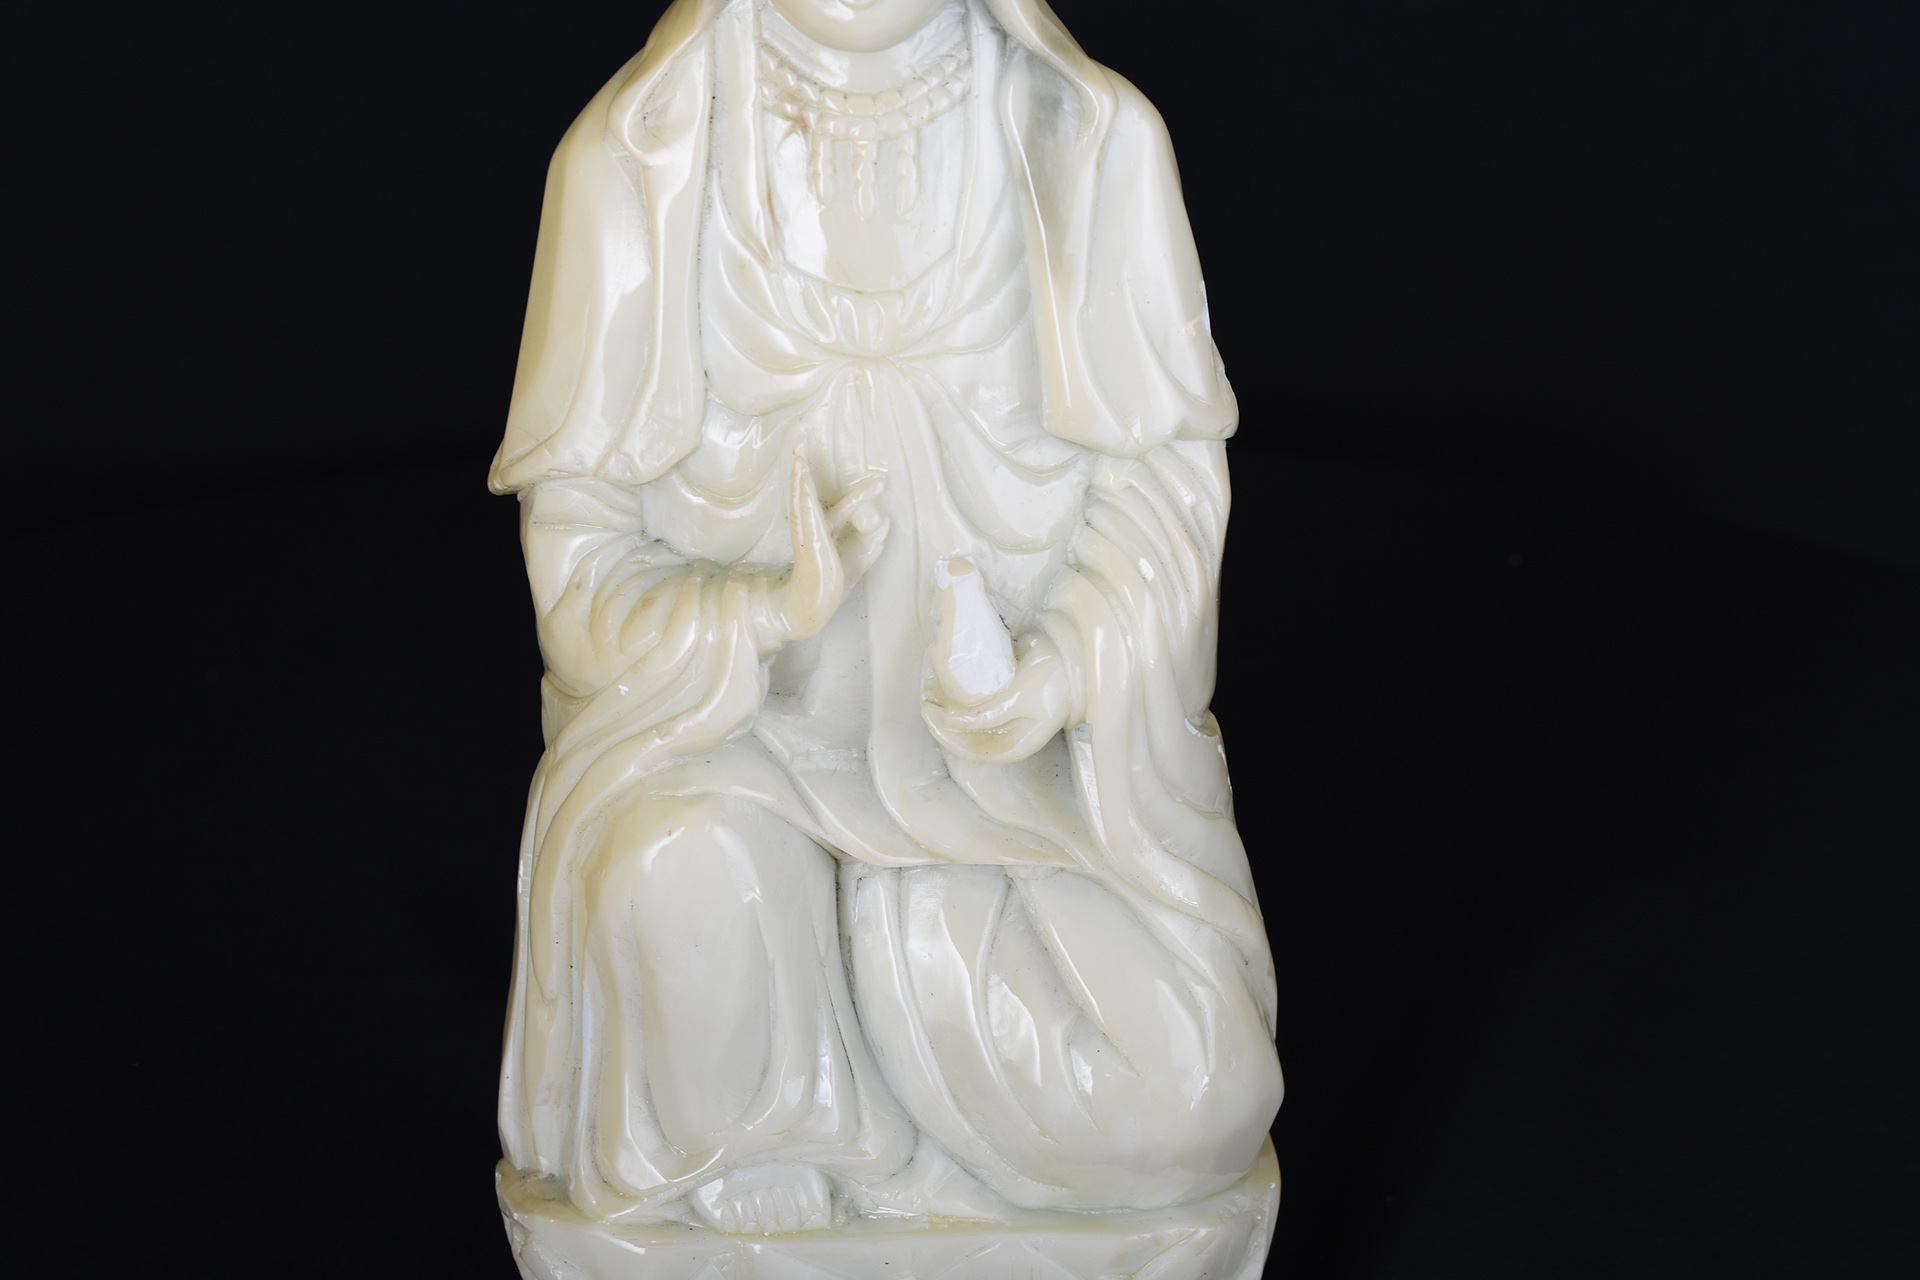 "Guan Yin" Goddess  Carving in Marble